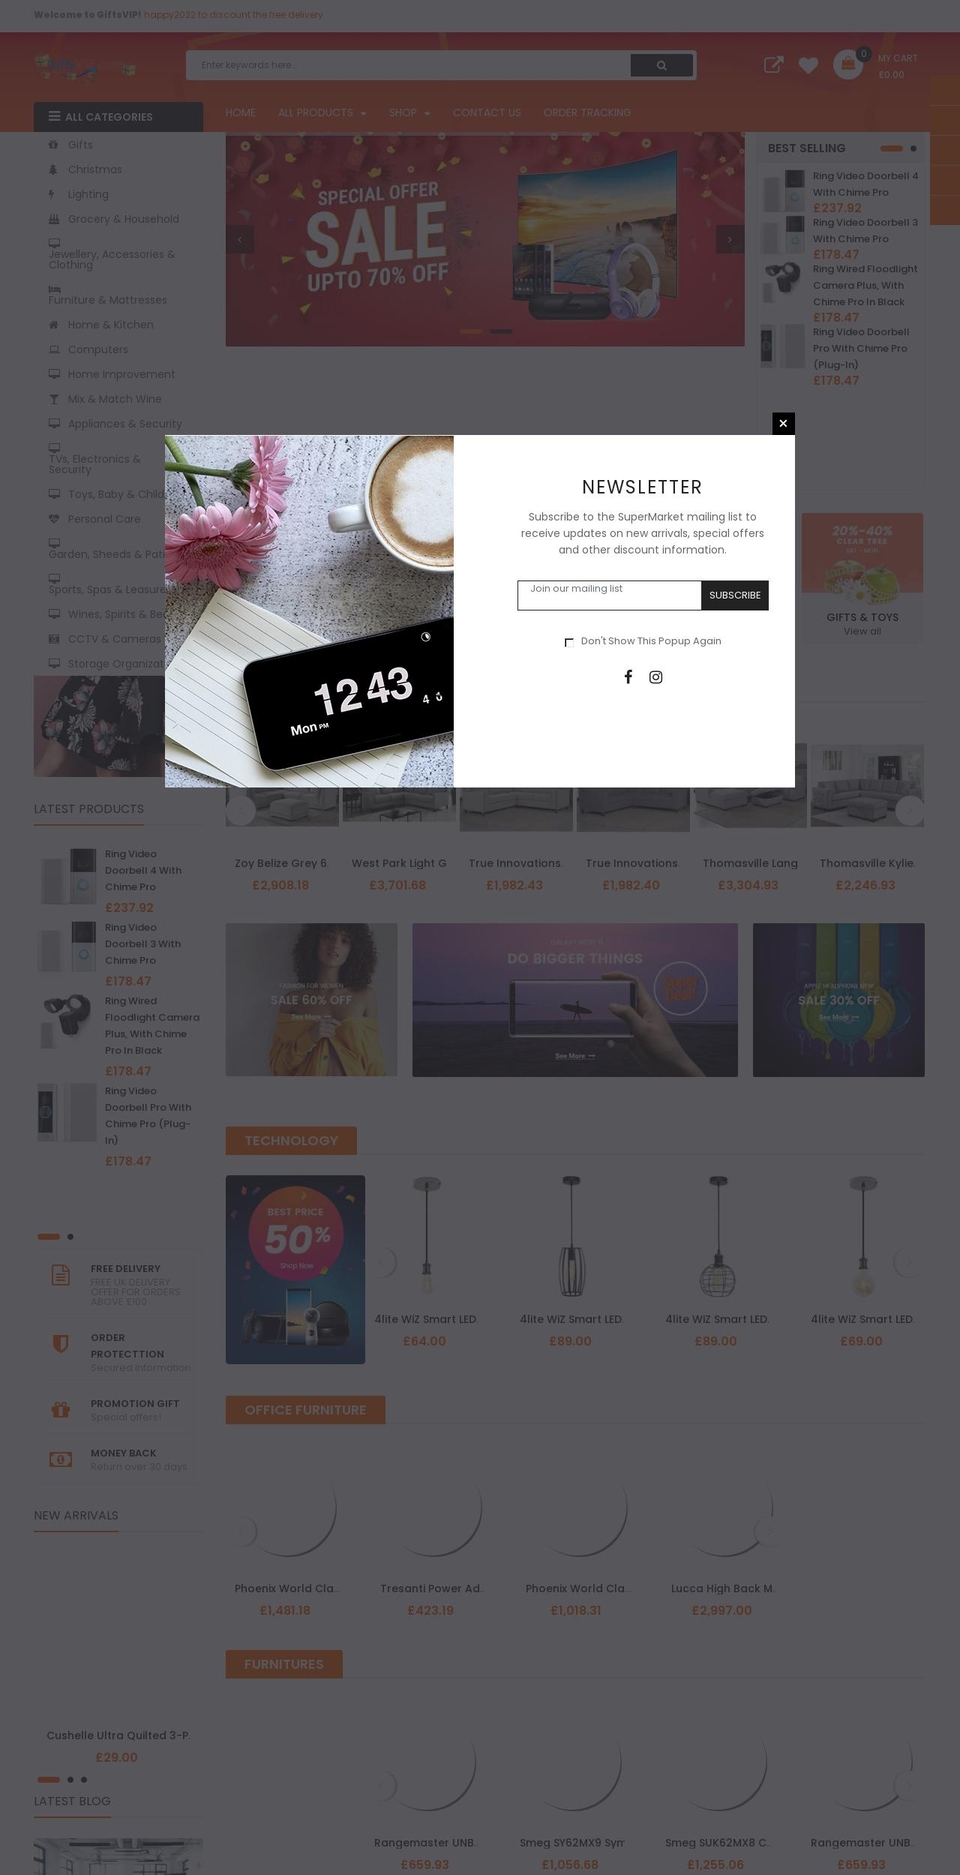 Gifts Shopify theme site example giftsvip.com